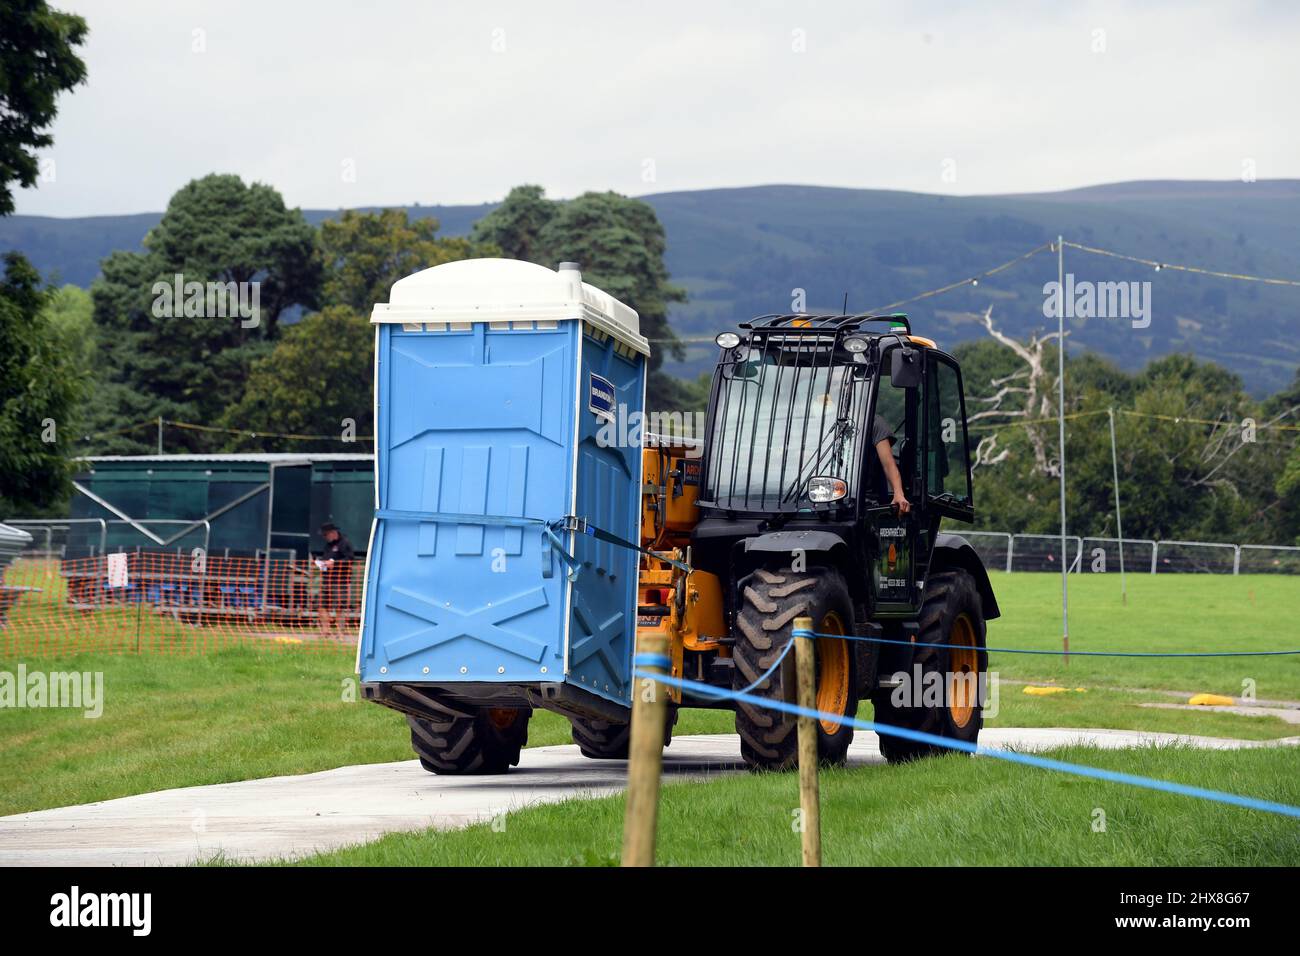 Workers onsite at the Glanusk Estate in Crickhowell, preparing the site in readiness for the 2021 Green Man Festival.   Toilets arriving on site  .  P Stock Photo